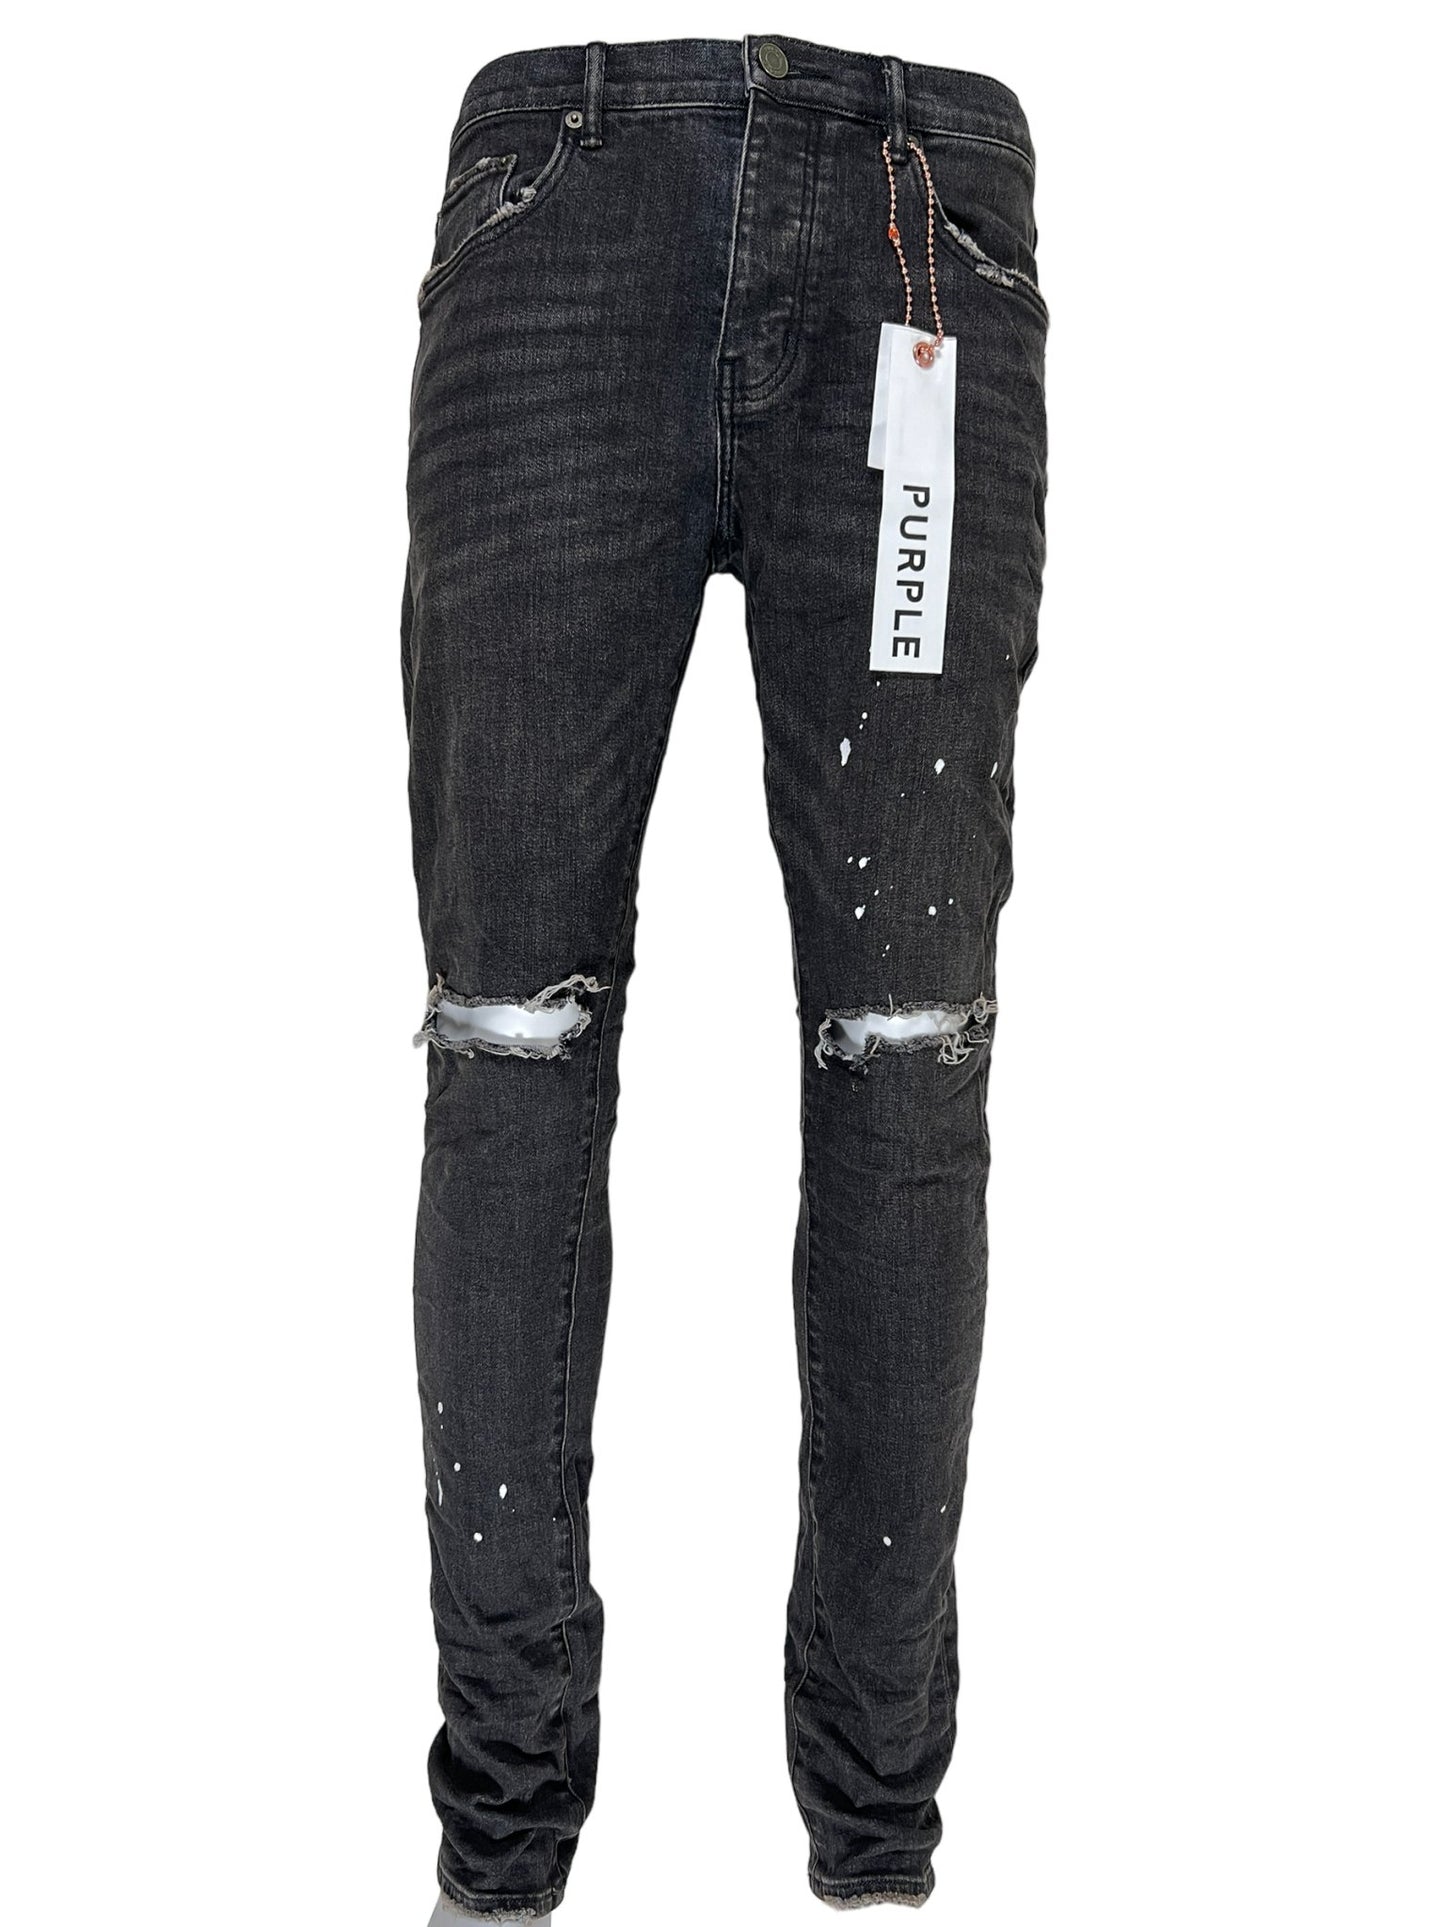 A pair of Purple Brand low rise skinny black jeans with a tag on them.